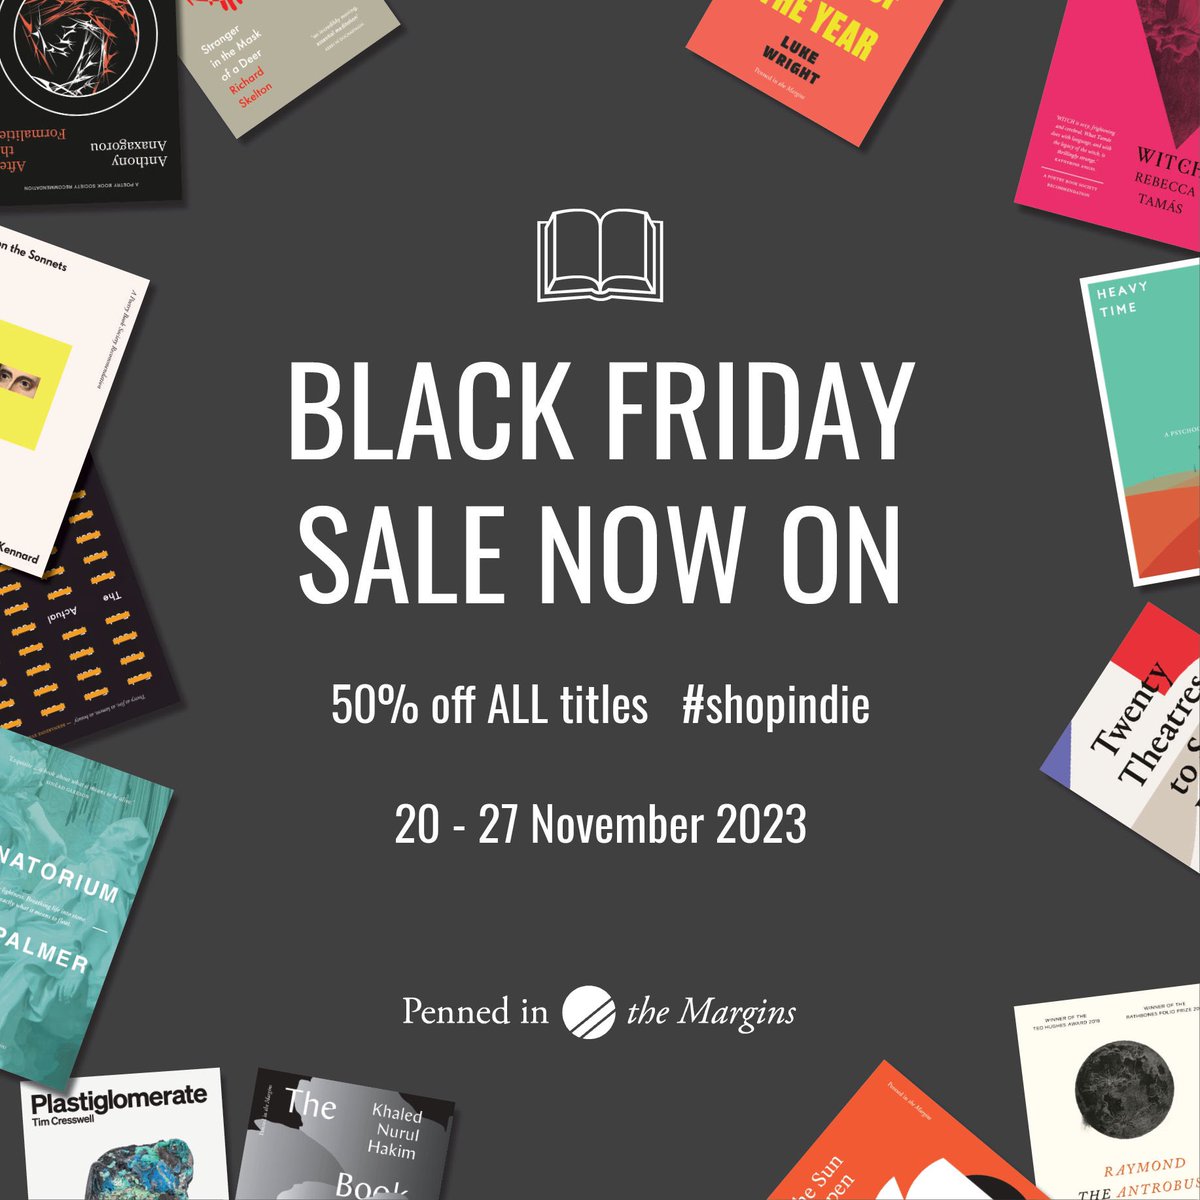 Get 50% off our award-winning books of poetry, fiction and non-fiction in our BLACK FRIDAY SALE 🖤 While stocks last 👉 pennedinthemargins.co.uk/index.php/cate…